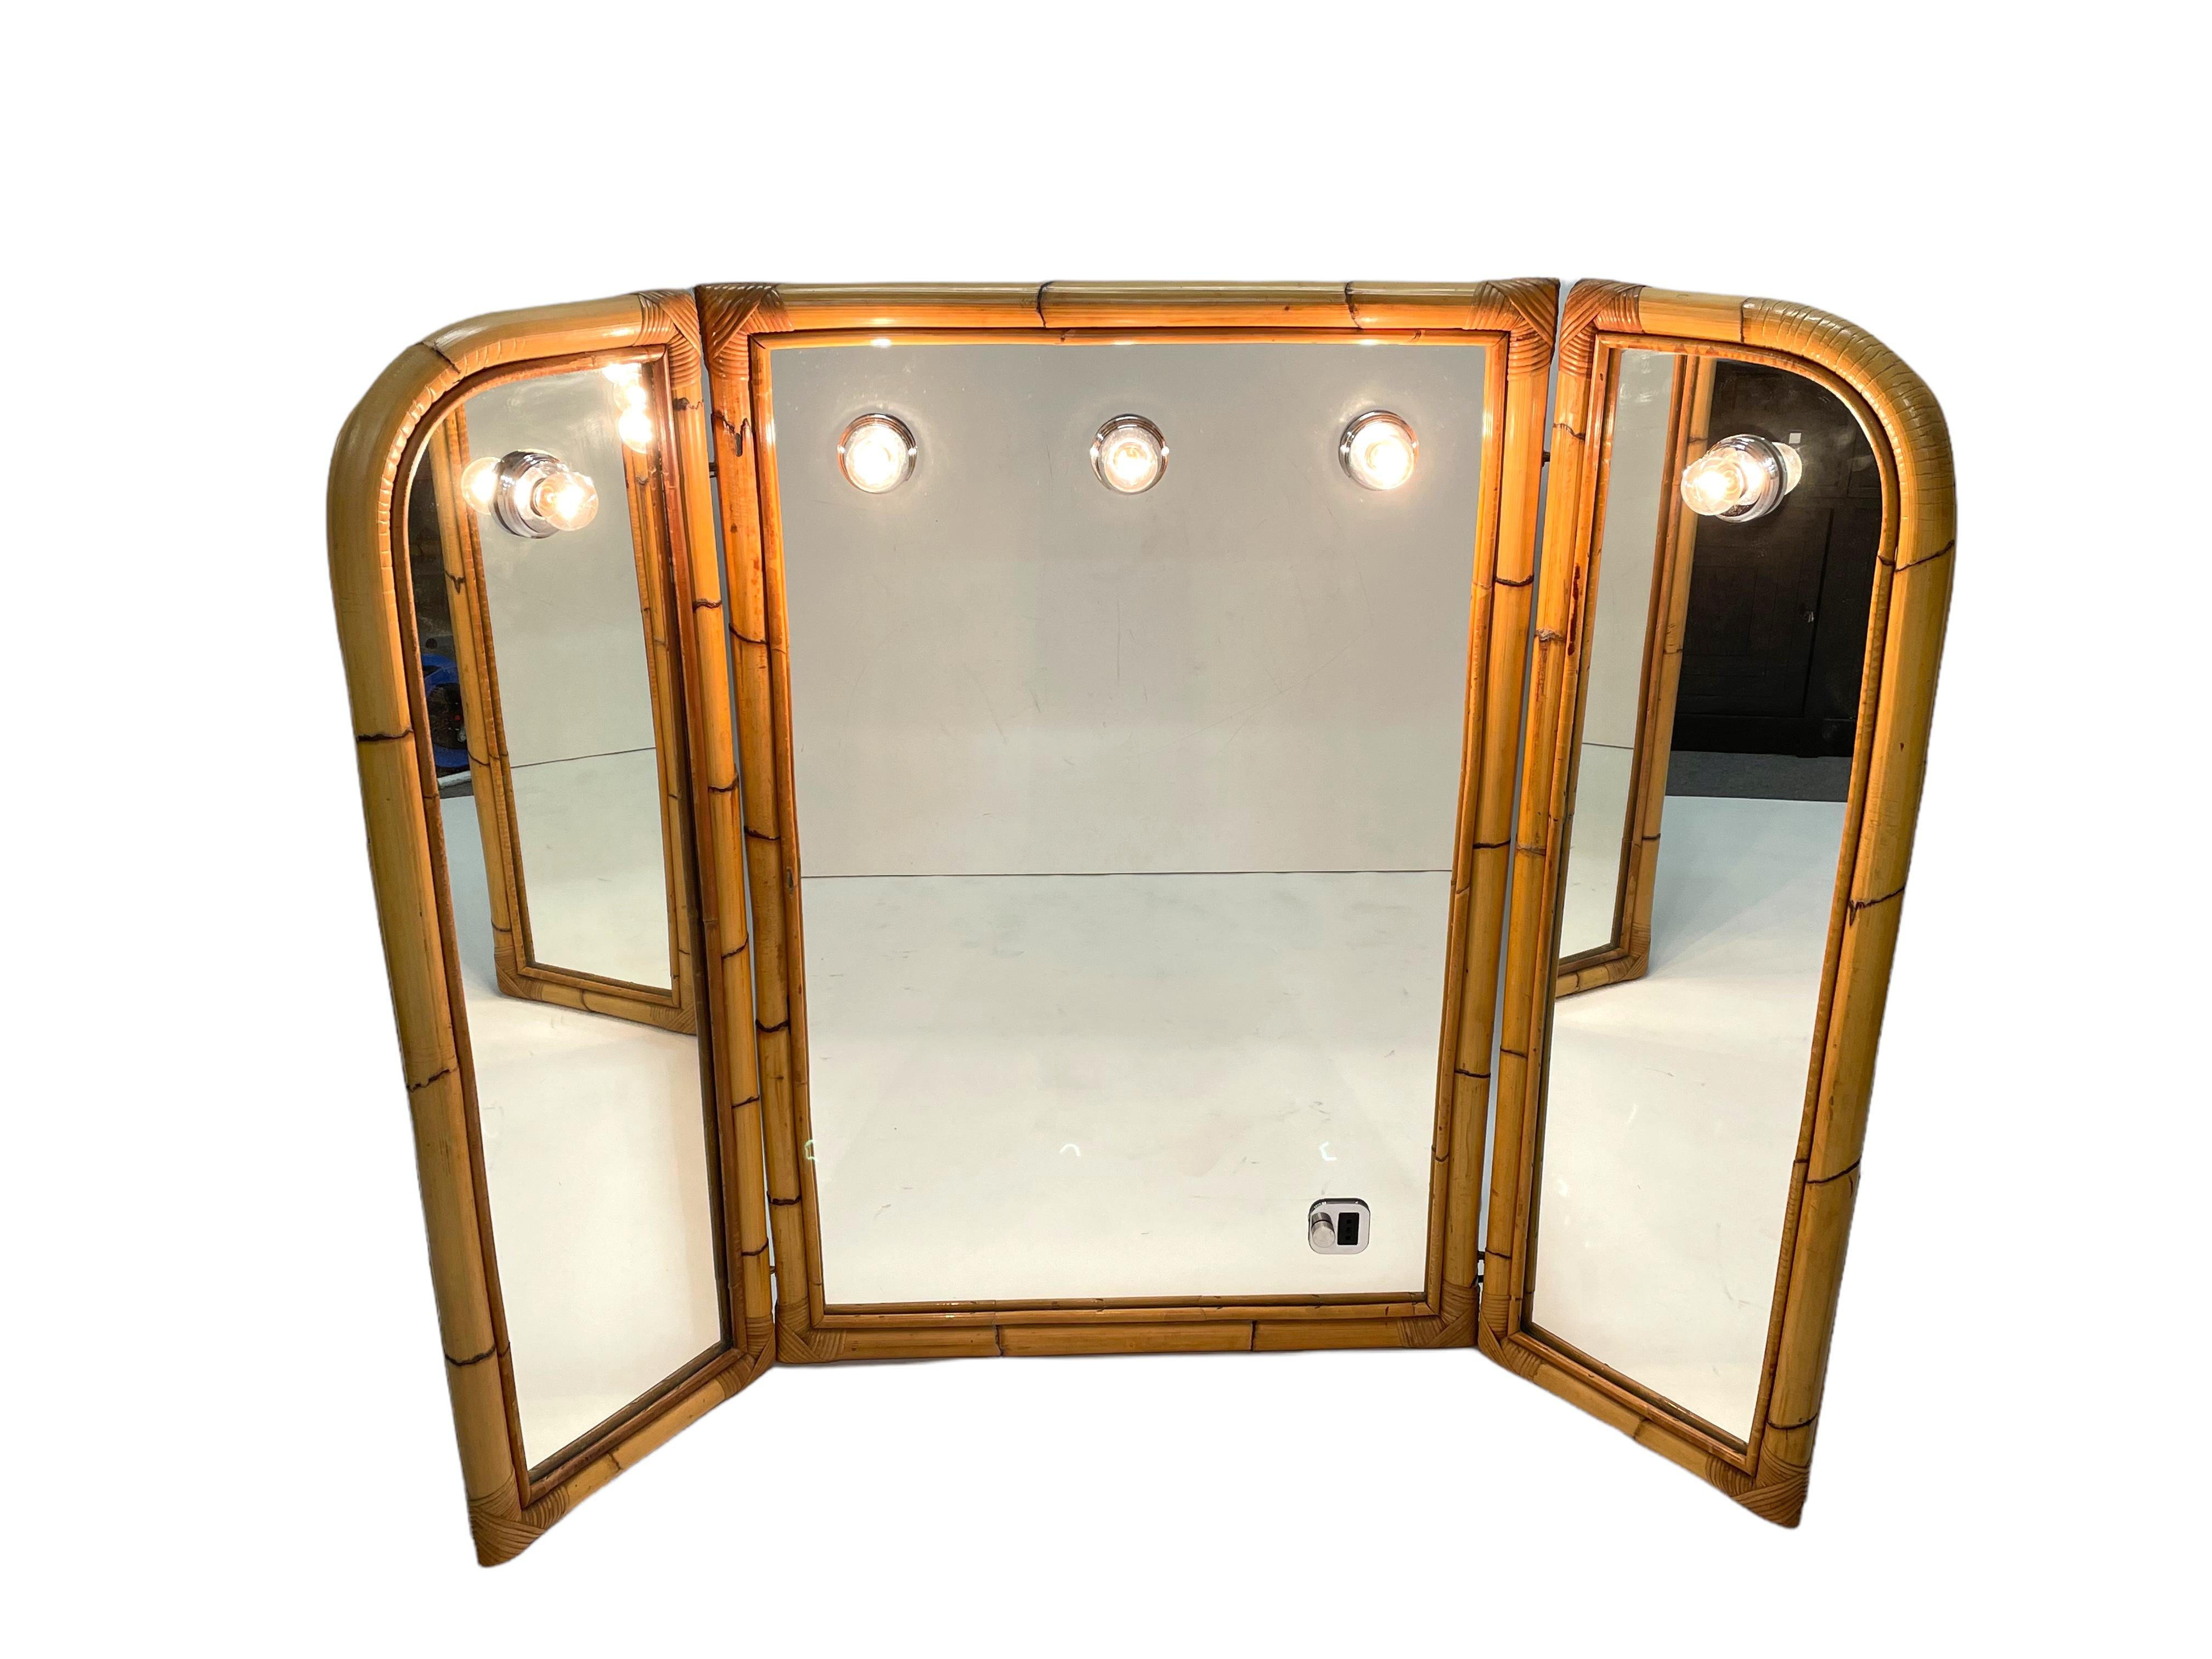 Midcentury Italian Triple Folding Bamboo Mirror with Dimmable Lighting, 1970s For Sale 7